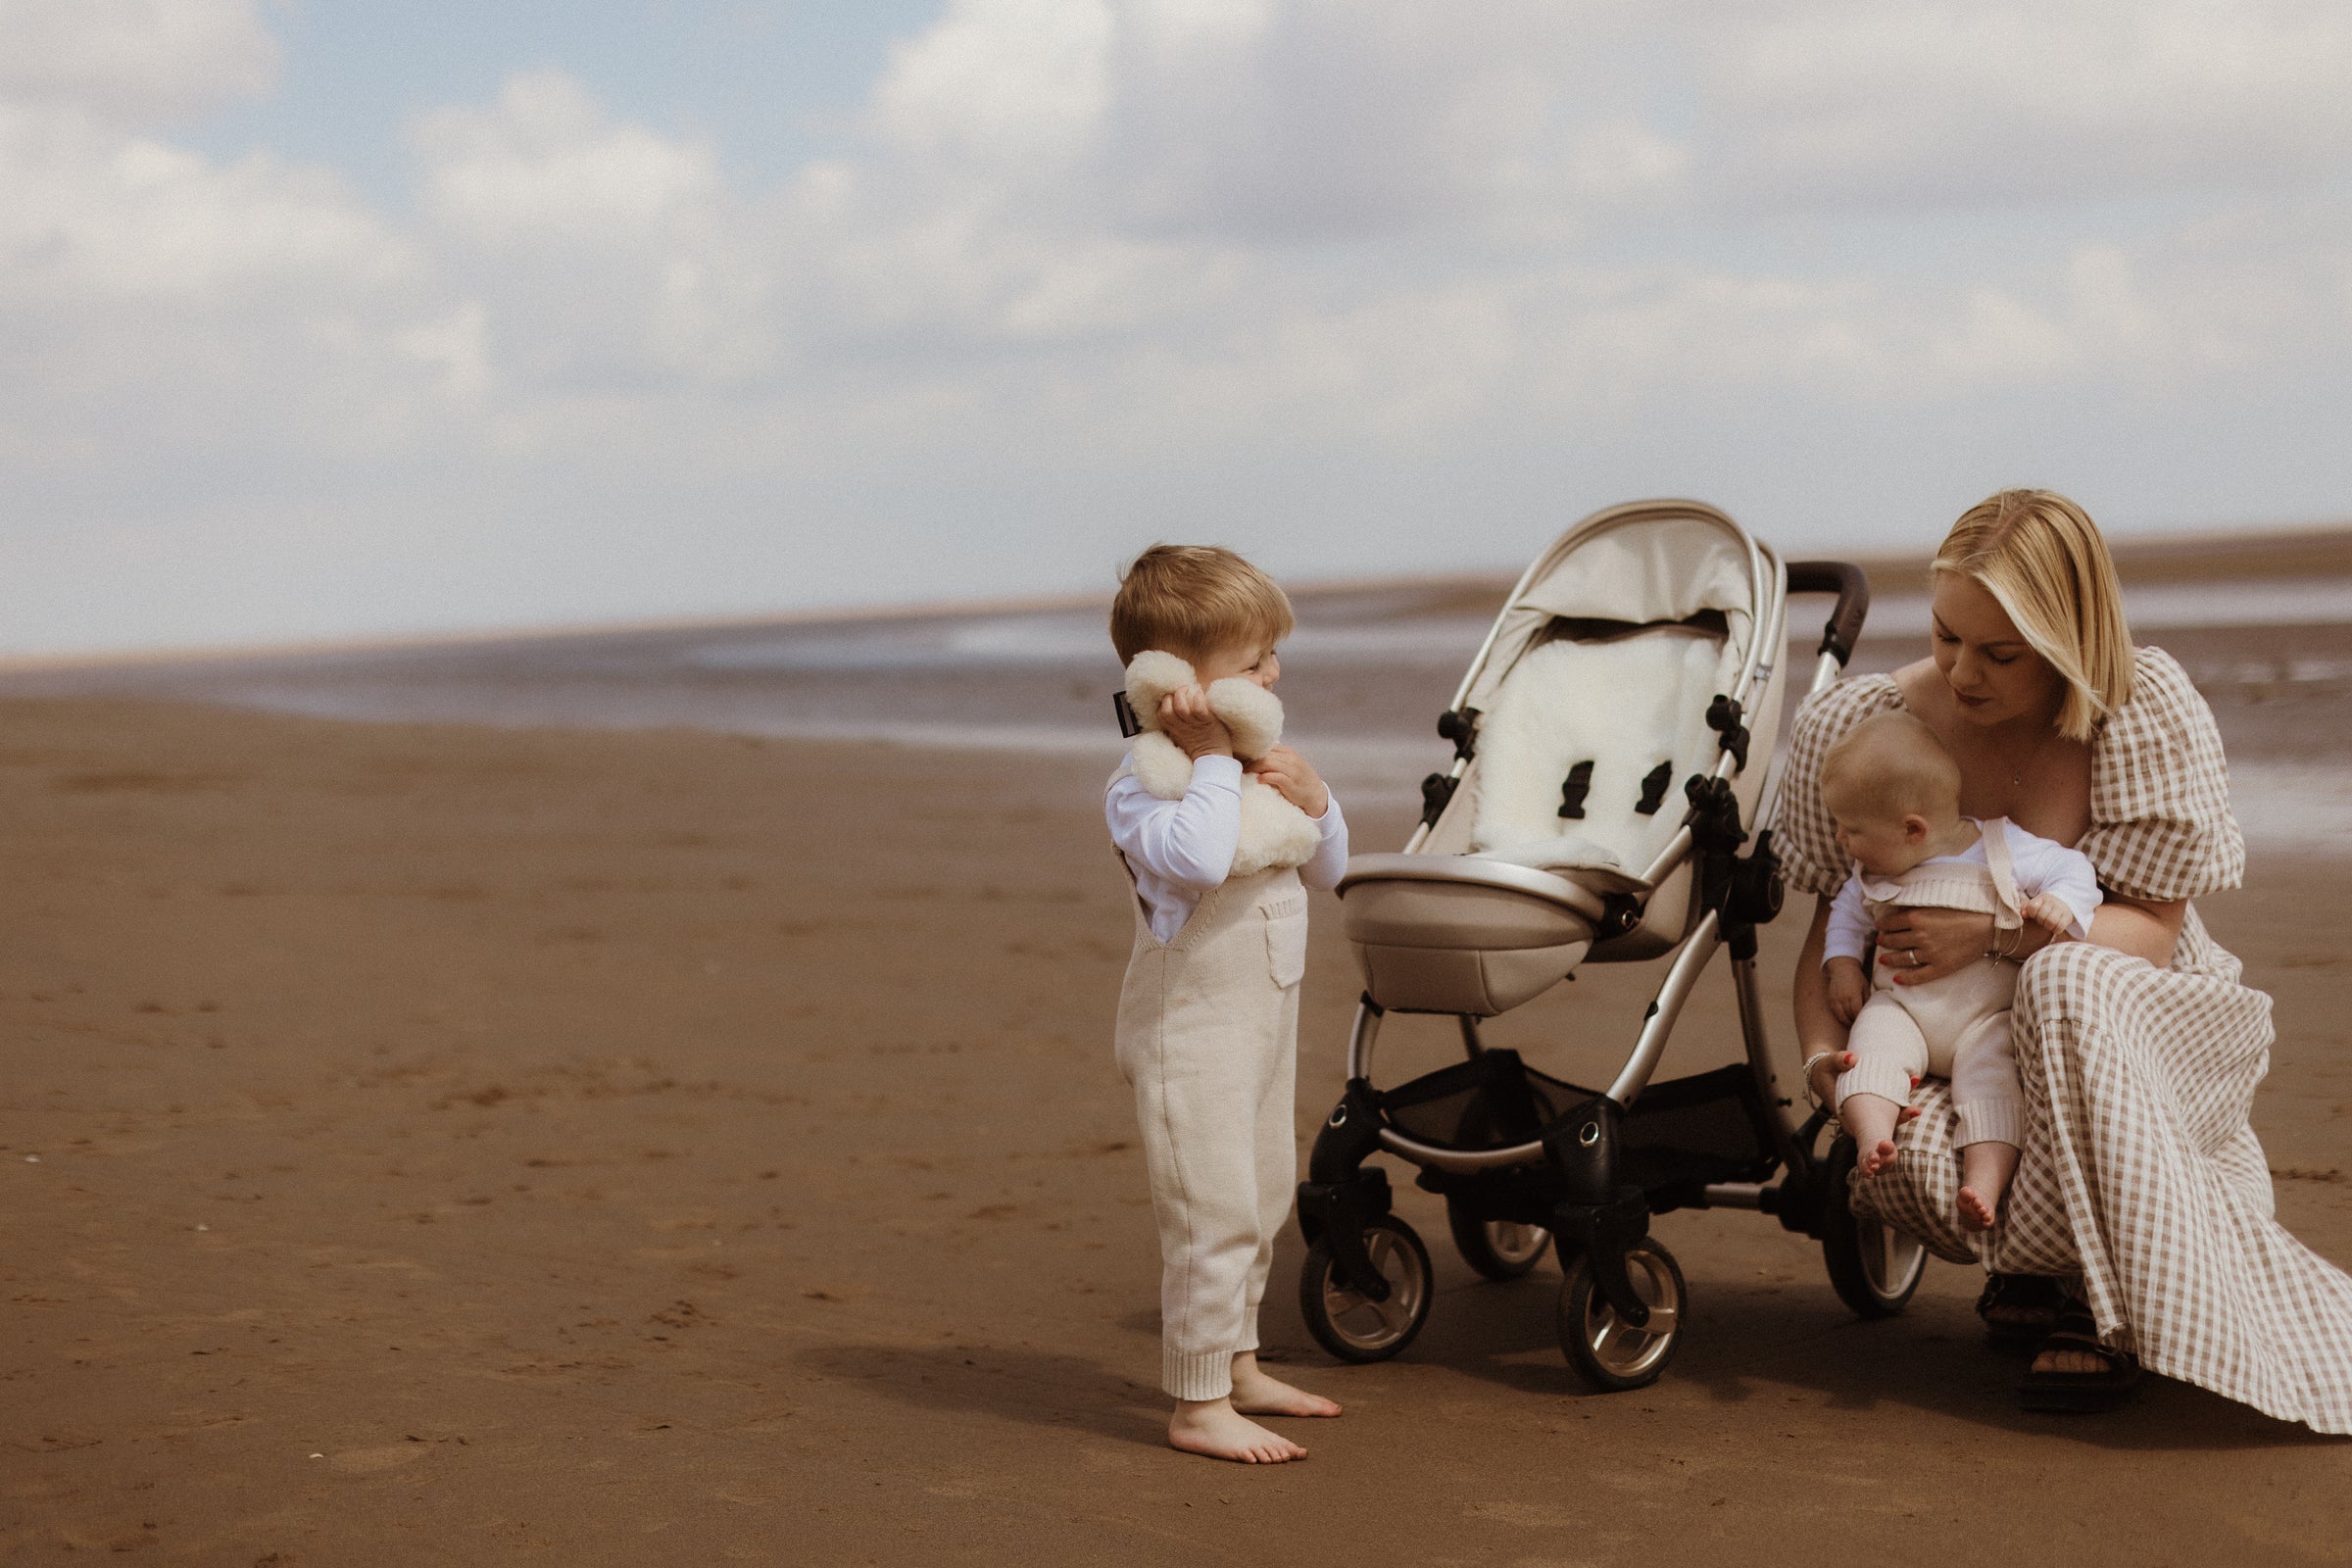 Sheepskin liner milk in a neutral pram with baby on holiday, older child holding a flat teddy bear